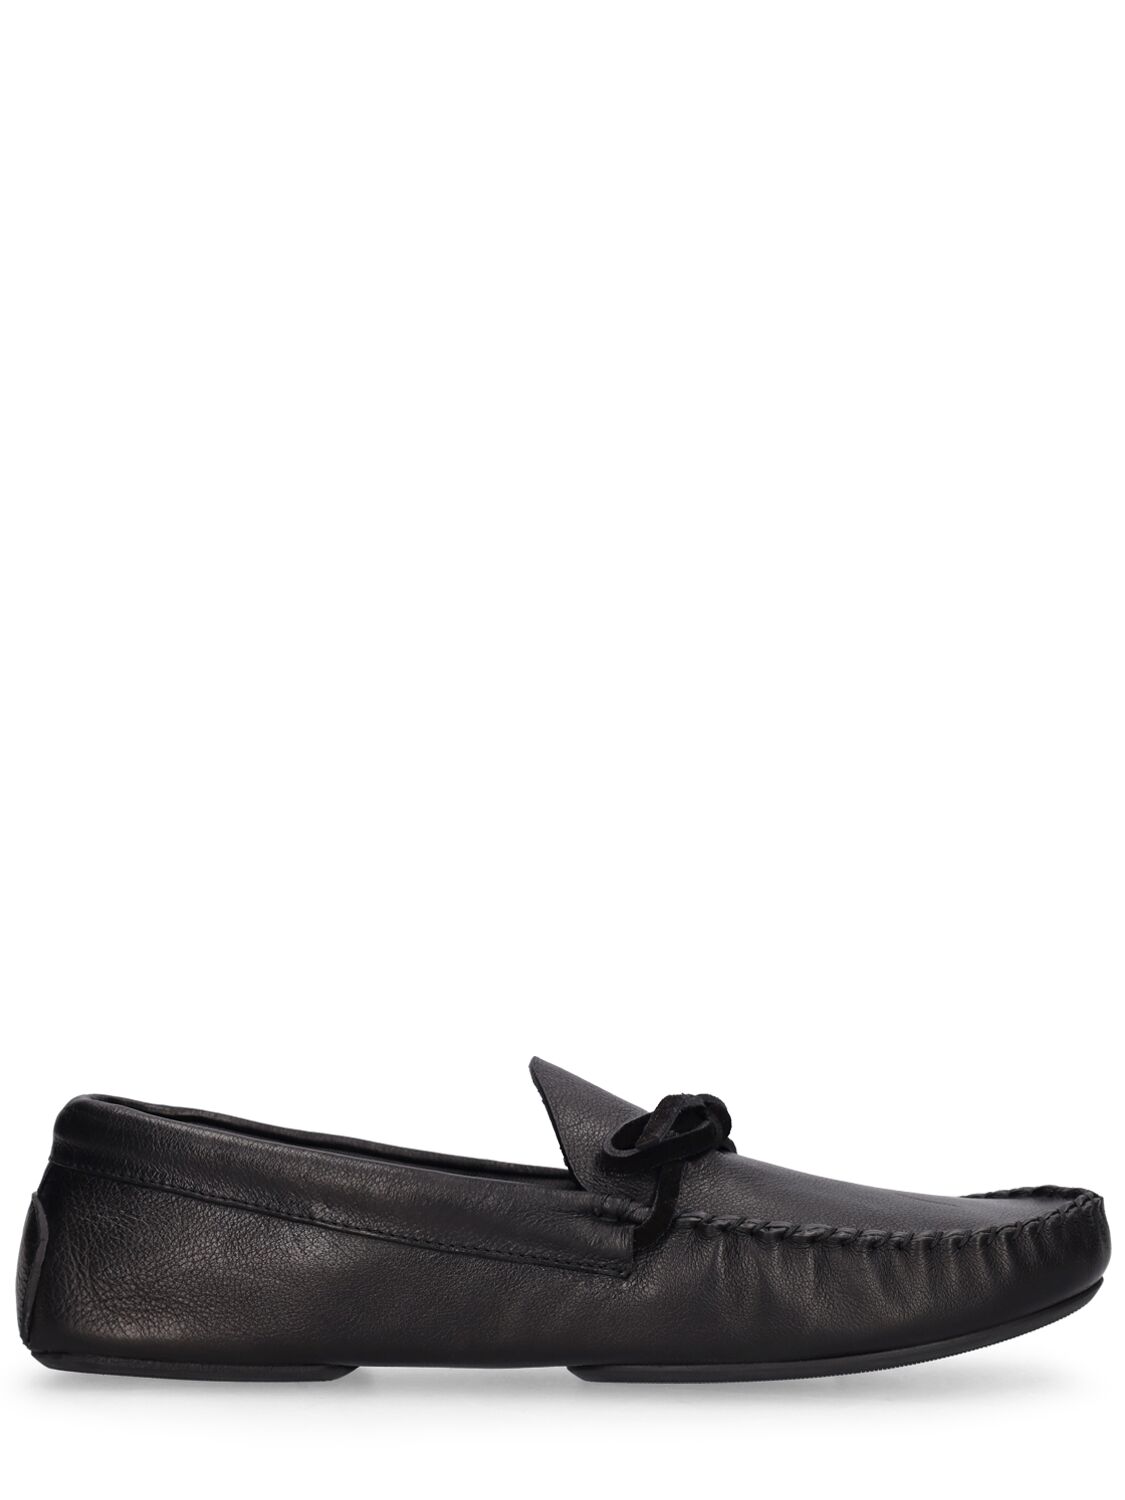 The Row Lucca Calfskin Mocassin Loafers In Black | ModeSens